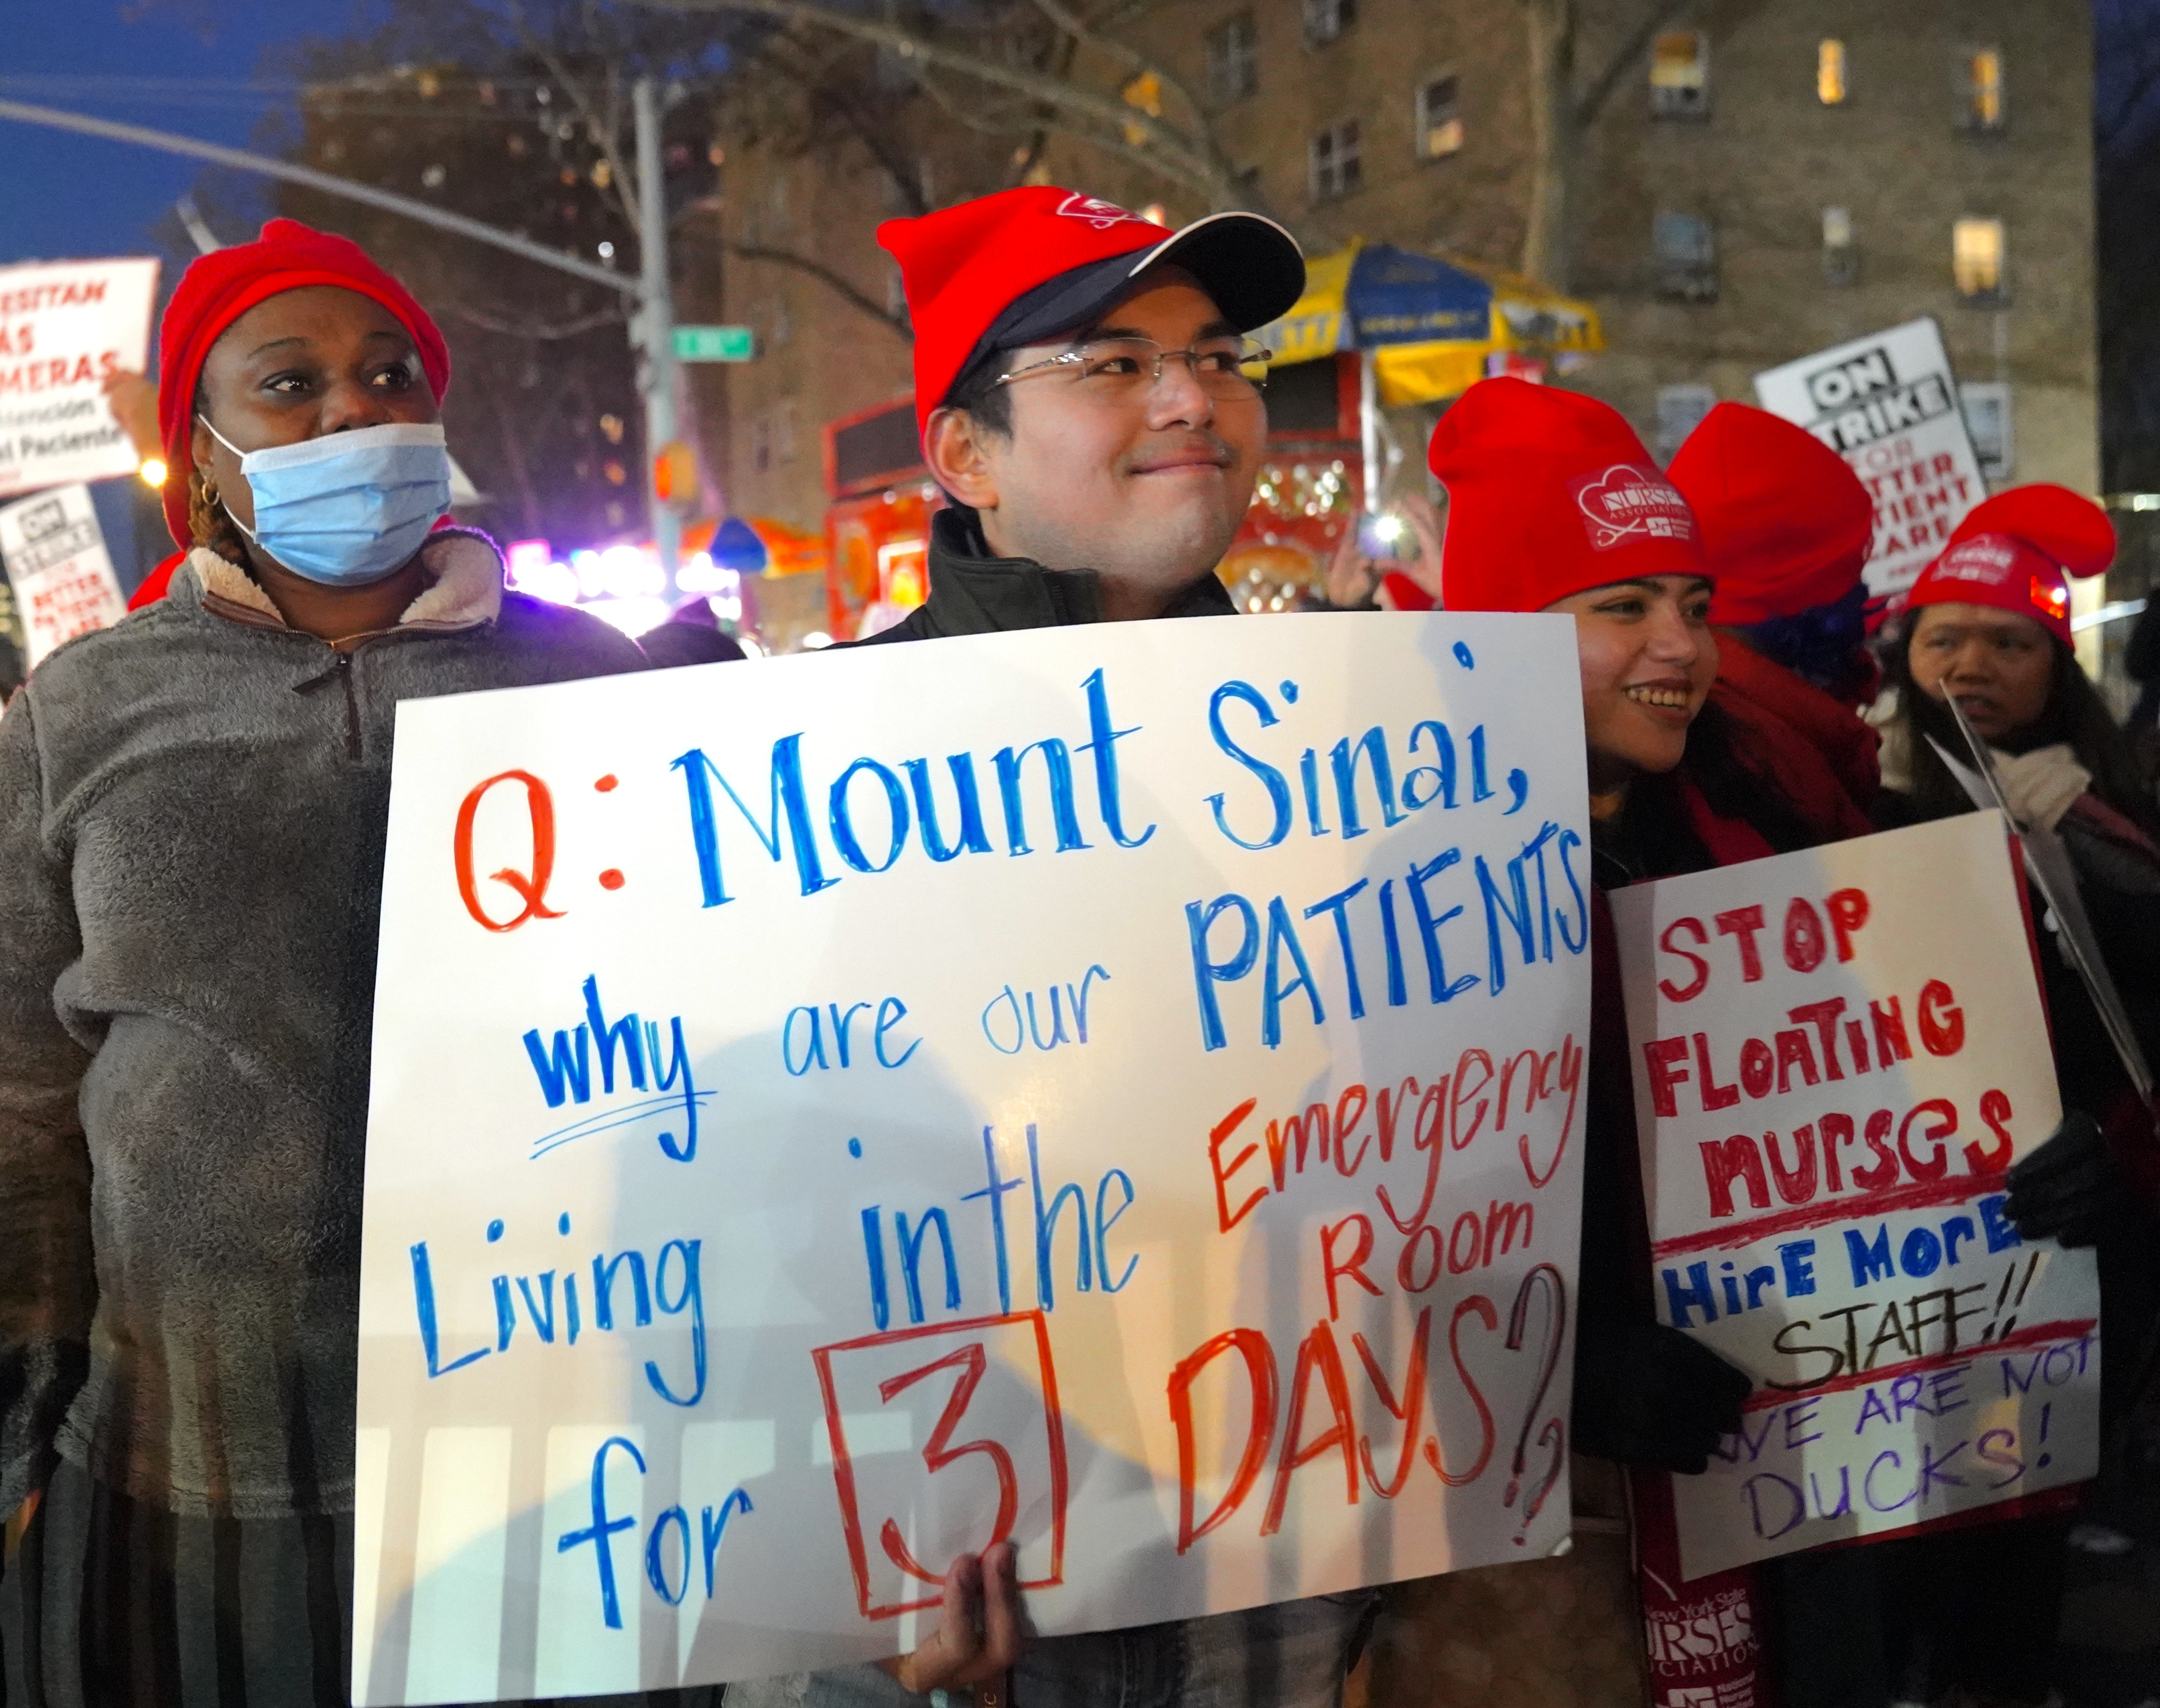 Nurses at two of New York City's biggest hospitals are seen protesting before they terminate their strike on the third day as they reach tentative contract agreements according to the statement of New York State Nurses Association in New York City, United States on January 11, 2023. (Photo by Selcuk Acar/Anadolu Agency via Getty Images)